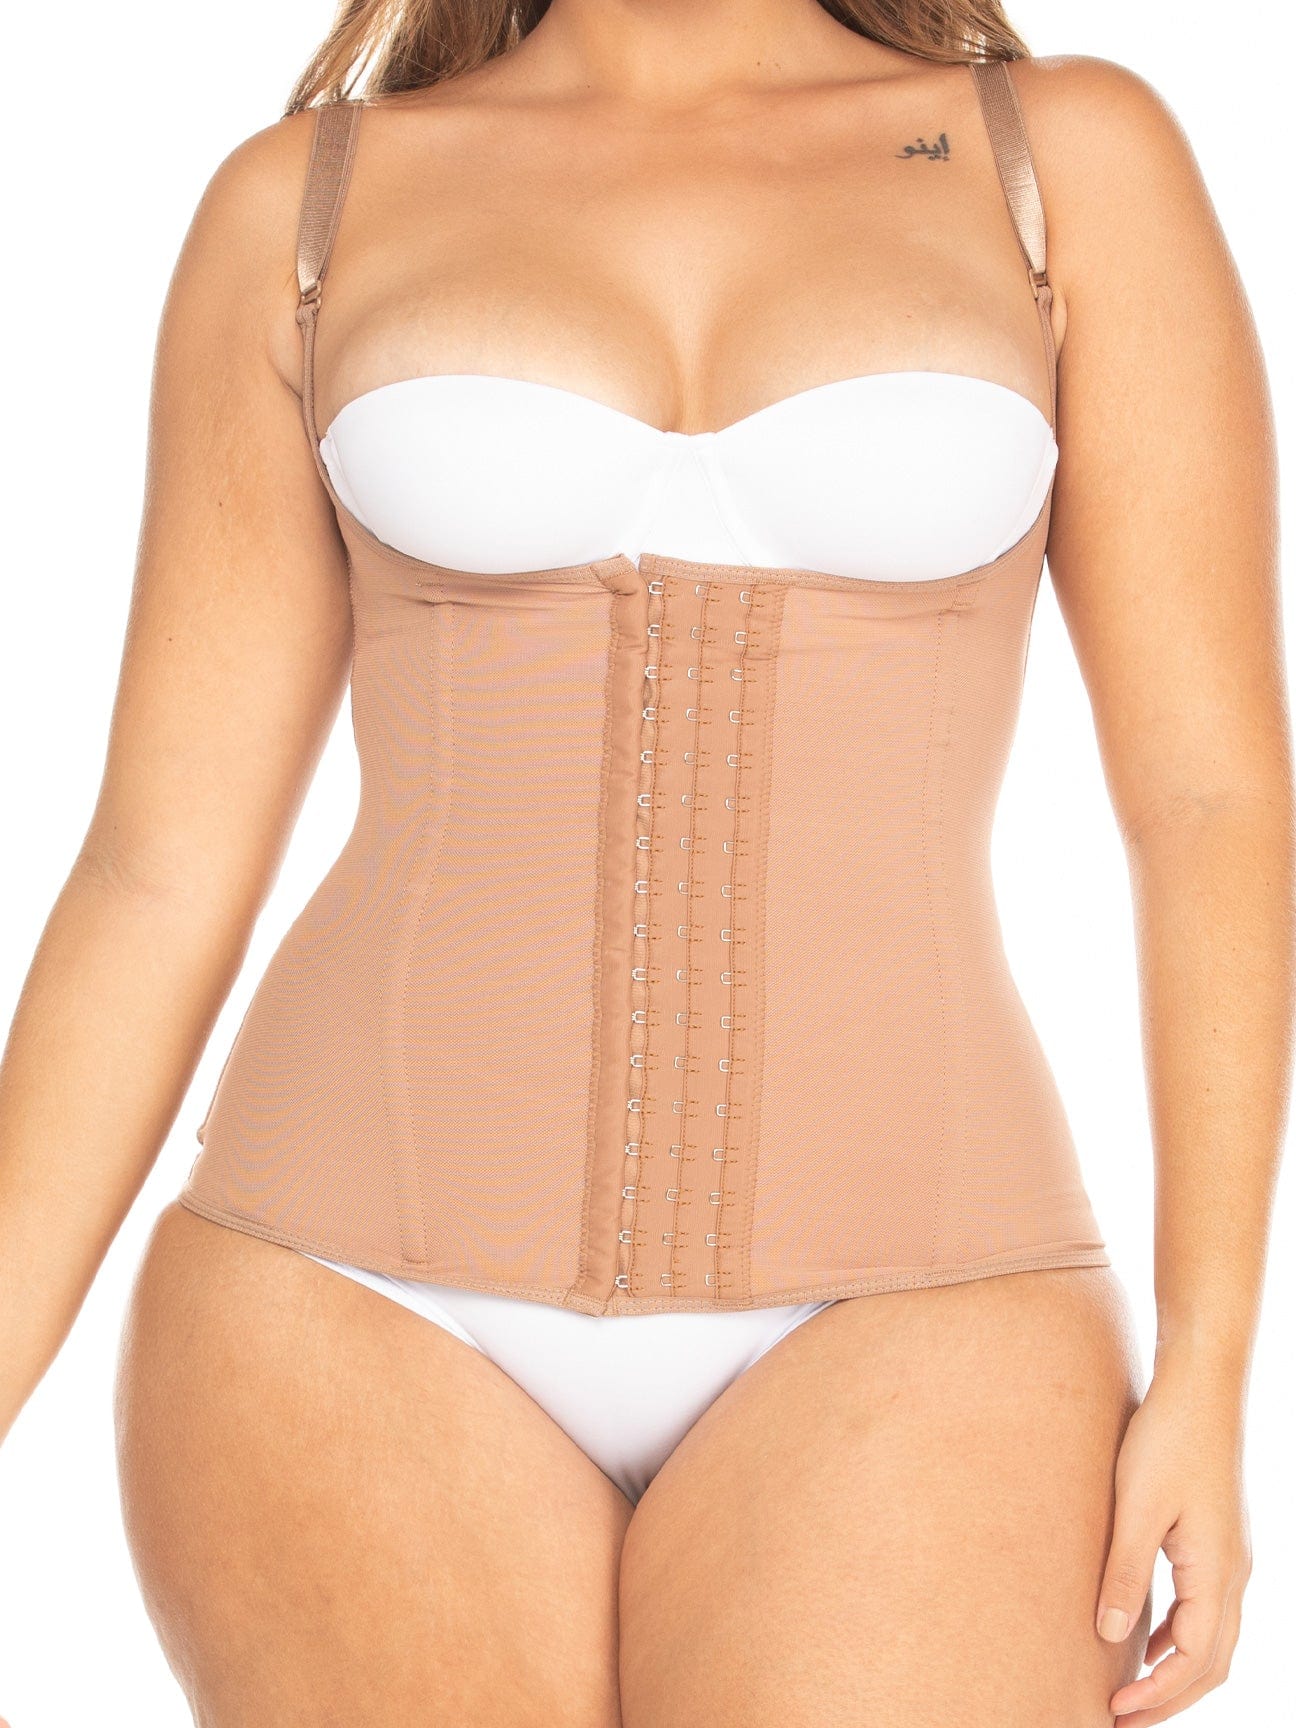 Colombian Waist Nipper Corset With Tummy Control And Front Hooks For Women  Slimming And Shapewear From Jiu07, $26.8